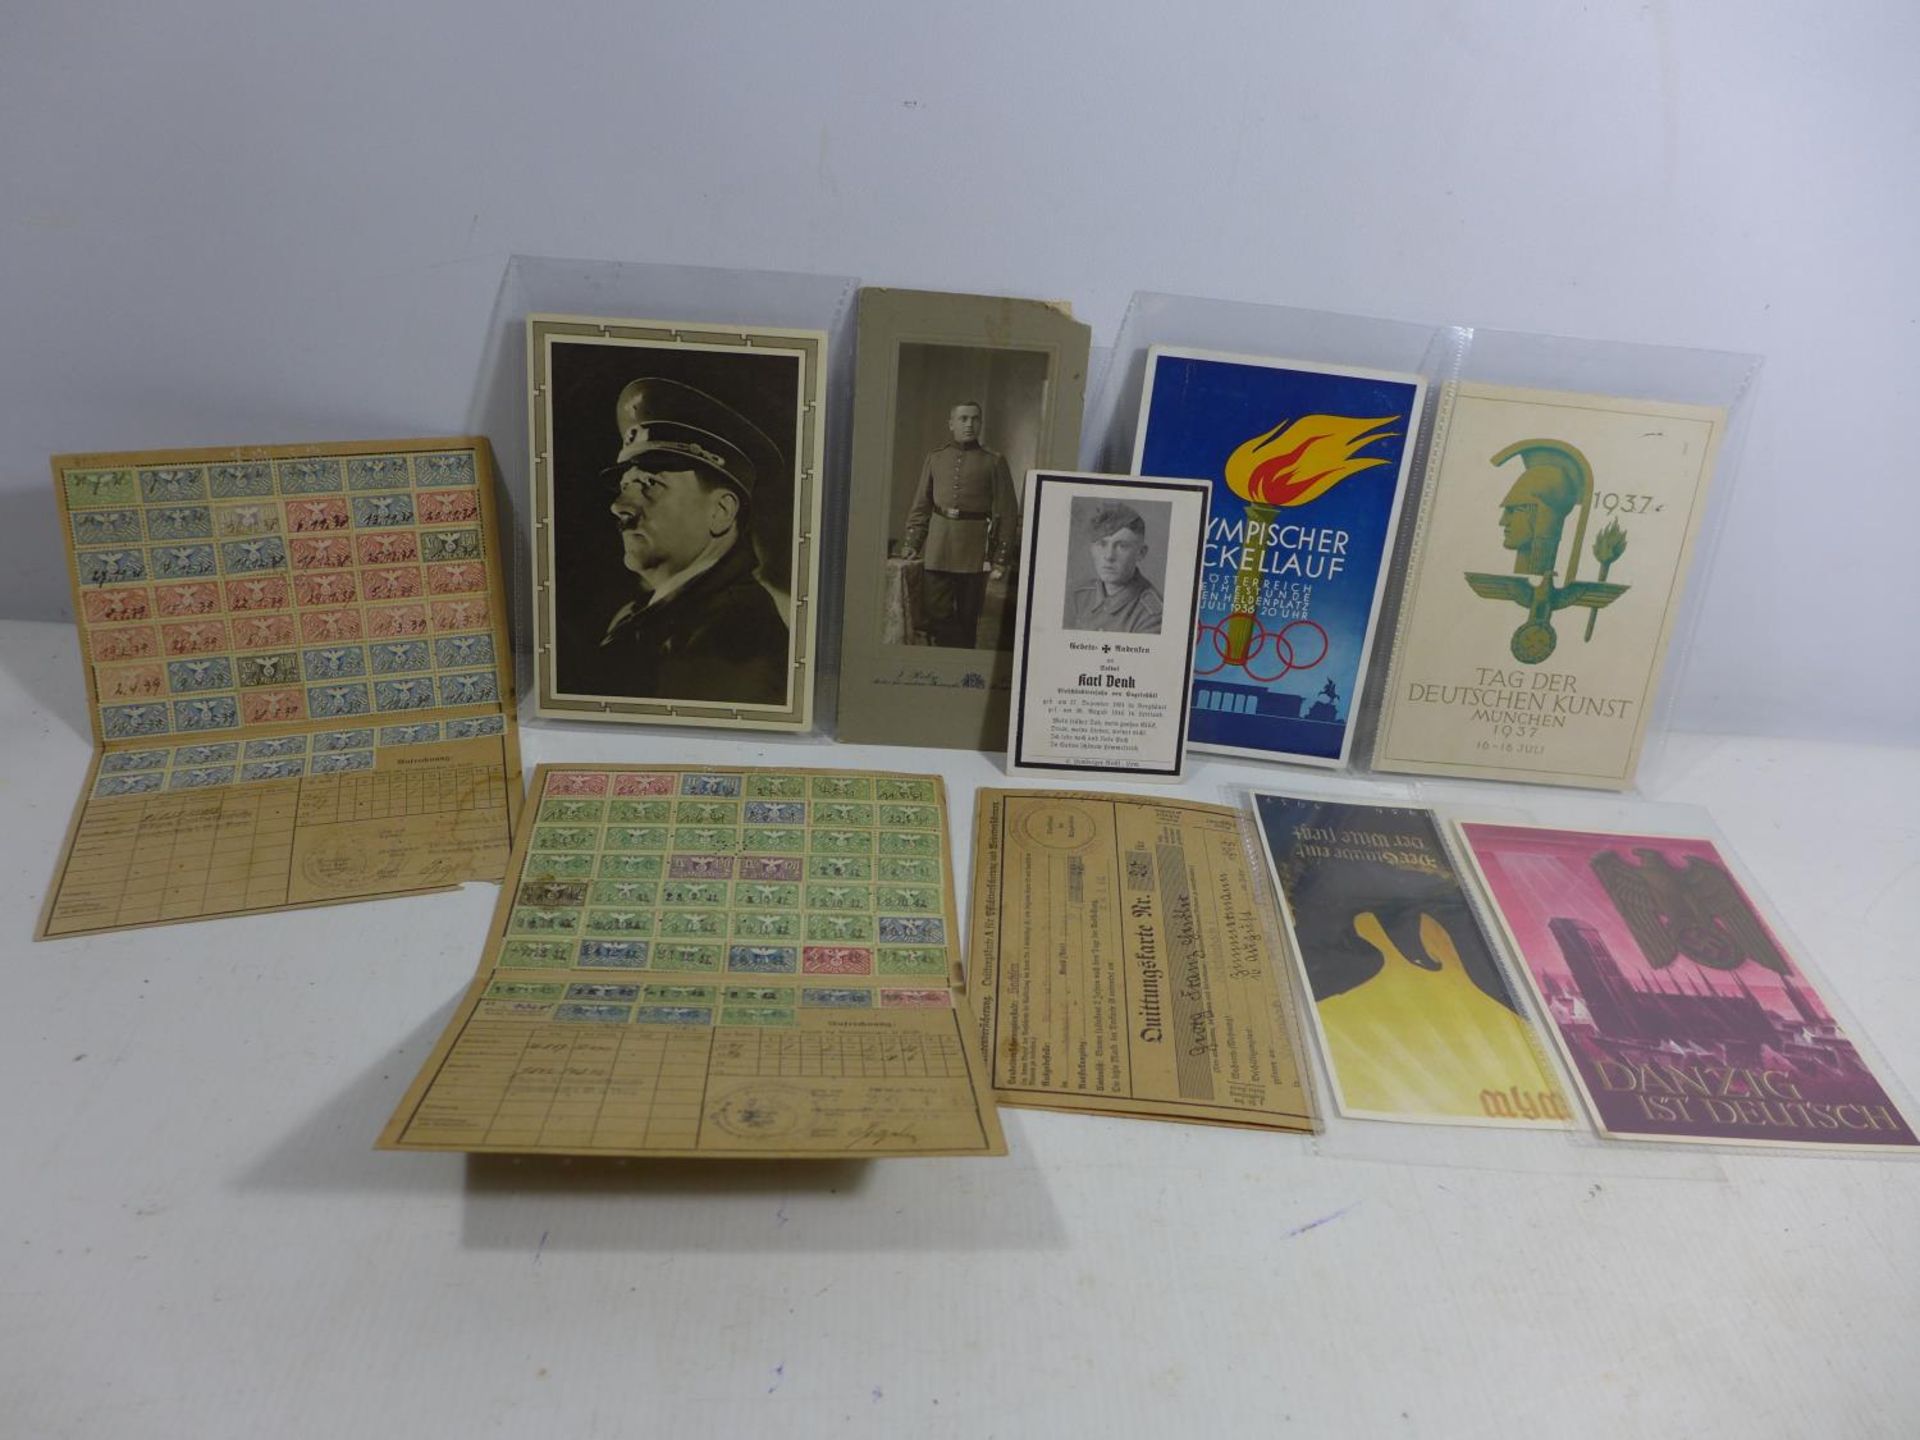 A COLLECTION OF NAZI GERMANY EPHEMERA TO INCLUDE PHOTOGRAPHS, INVALIDENVERS CARDS ETC